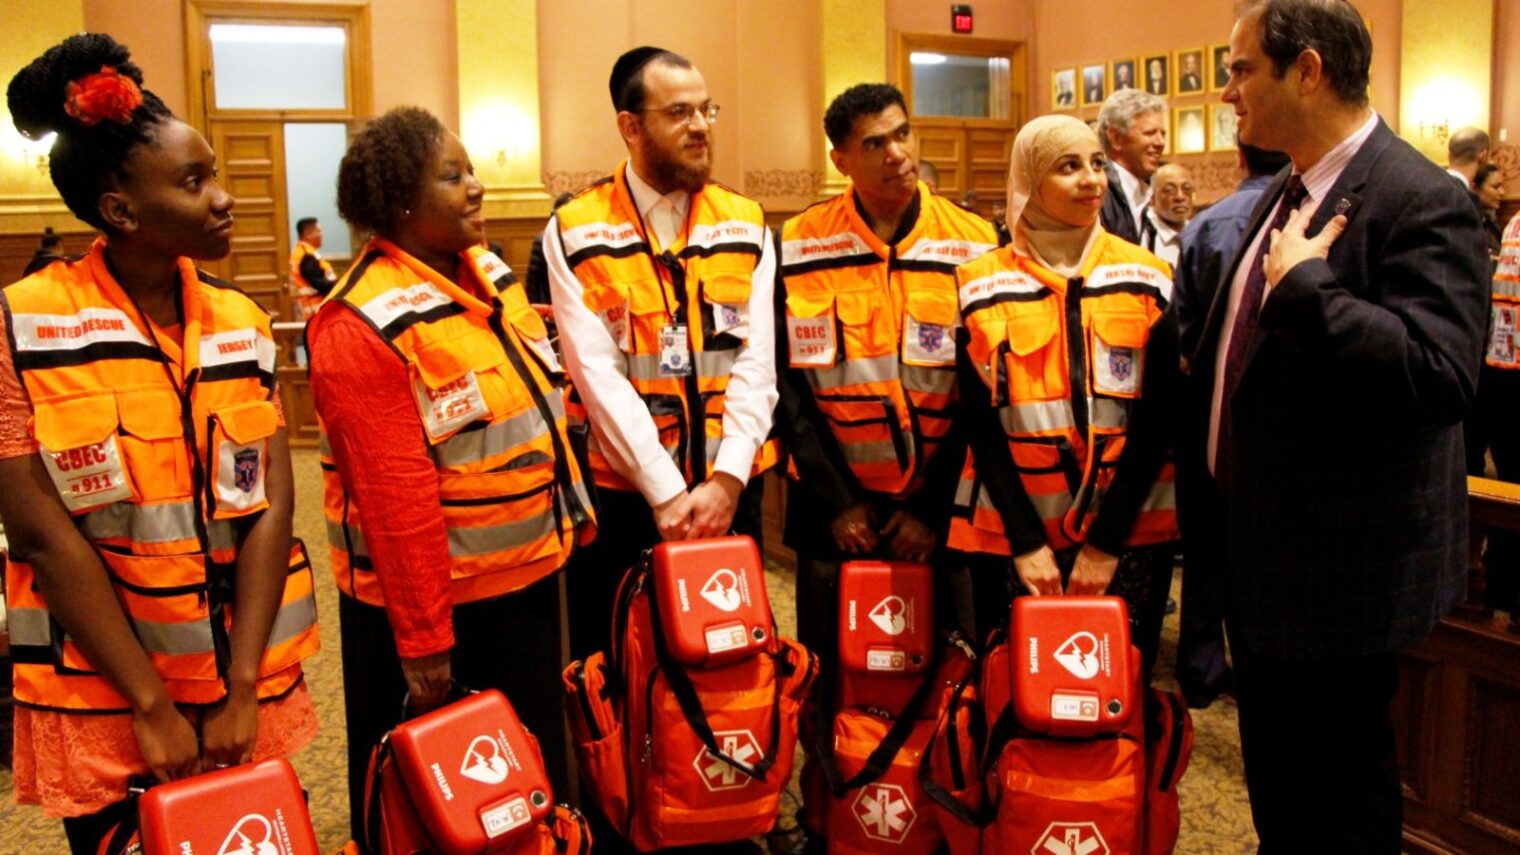 United Hatzalah founder Eli Beer with the first graduating class of volunteer first-responders in Jersey City. Photo by Yadin Goldman